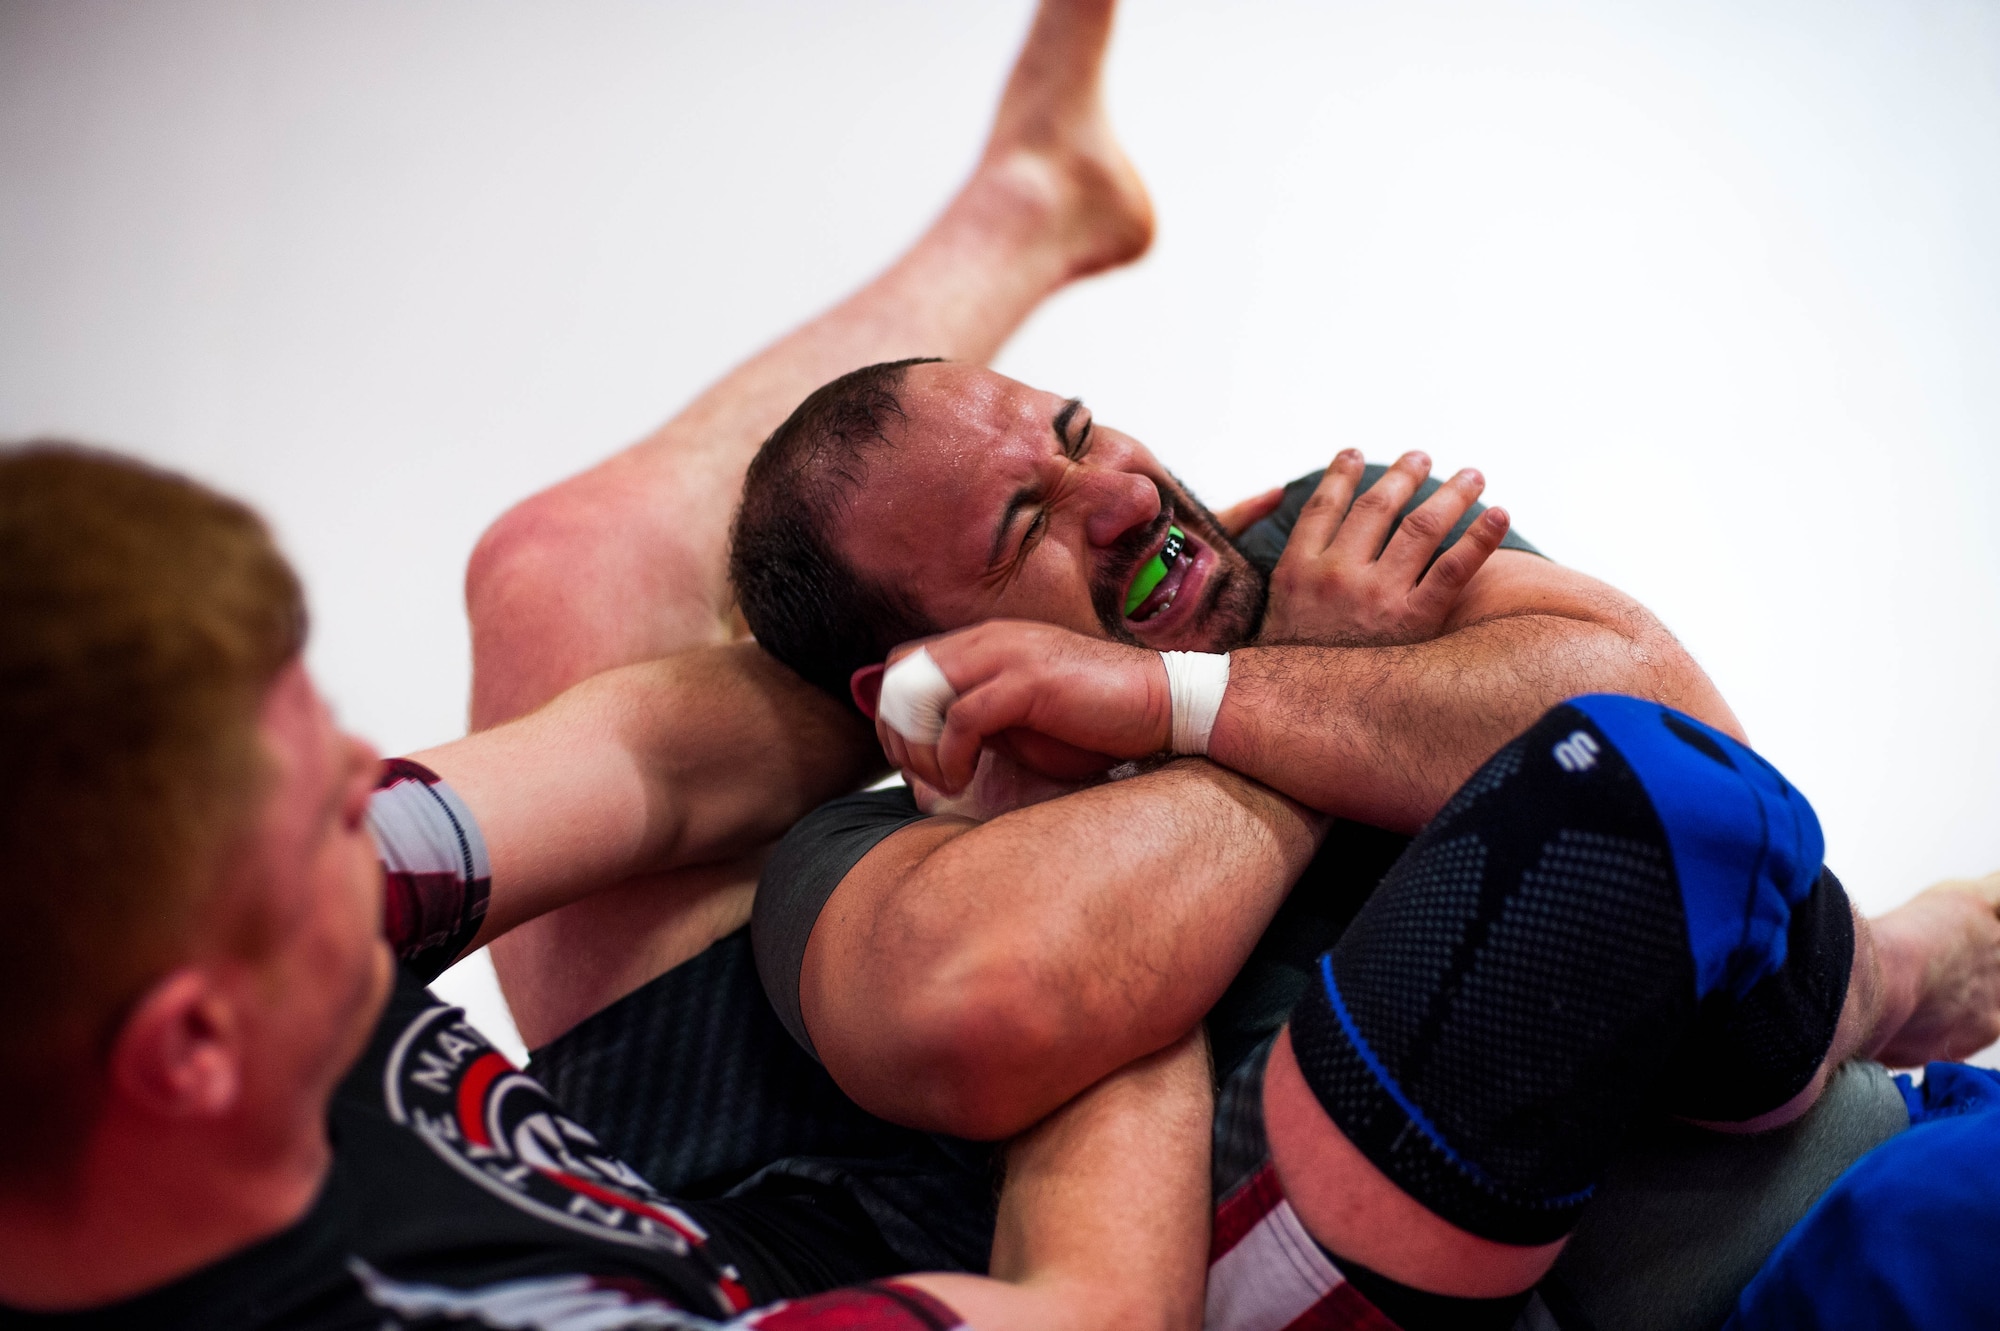 Giovani Gironda, Defense Logistics Agency contracting officer, attempts to resist an arm lock from U.S. Air Force Staff Sgt. Joseph Everett, 86th Aircraft Maintenance Squadron aerospace maintenance craftsman, left, during Brazilian Jiu Jitsu training on Ramstein Air Base, Germany, April 5, 2017. BJJ is a grappling style martial art that is designed to teach a smaller person how to defend themselves against a larger person. (U.S. Air Force photo by Senior Airman Devin Boyer/Released)